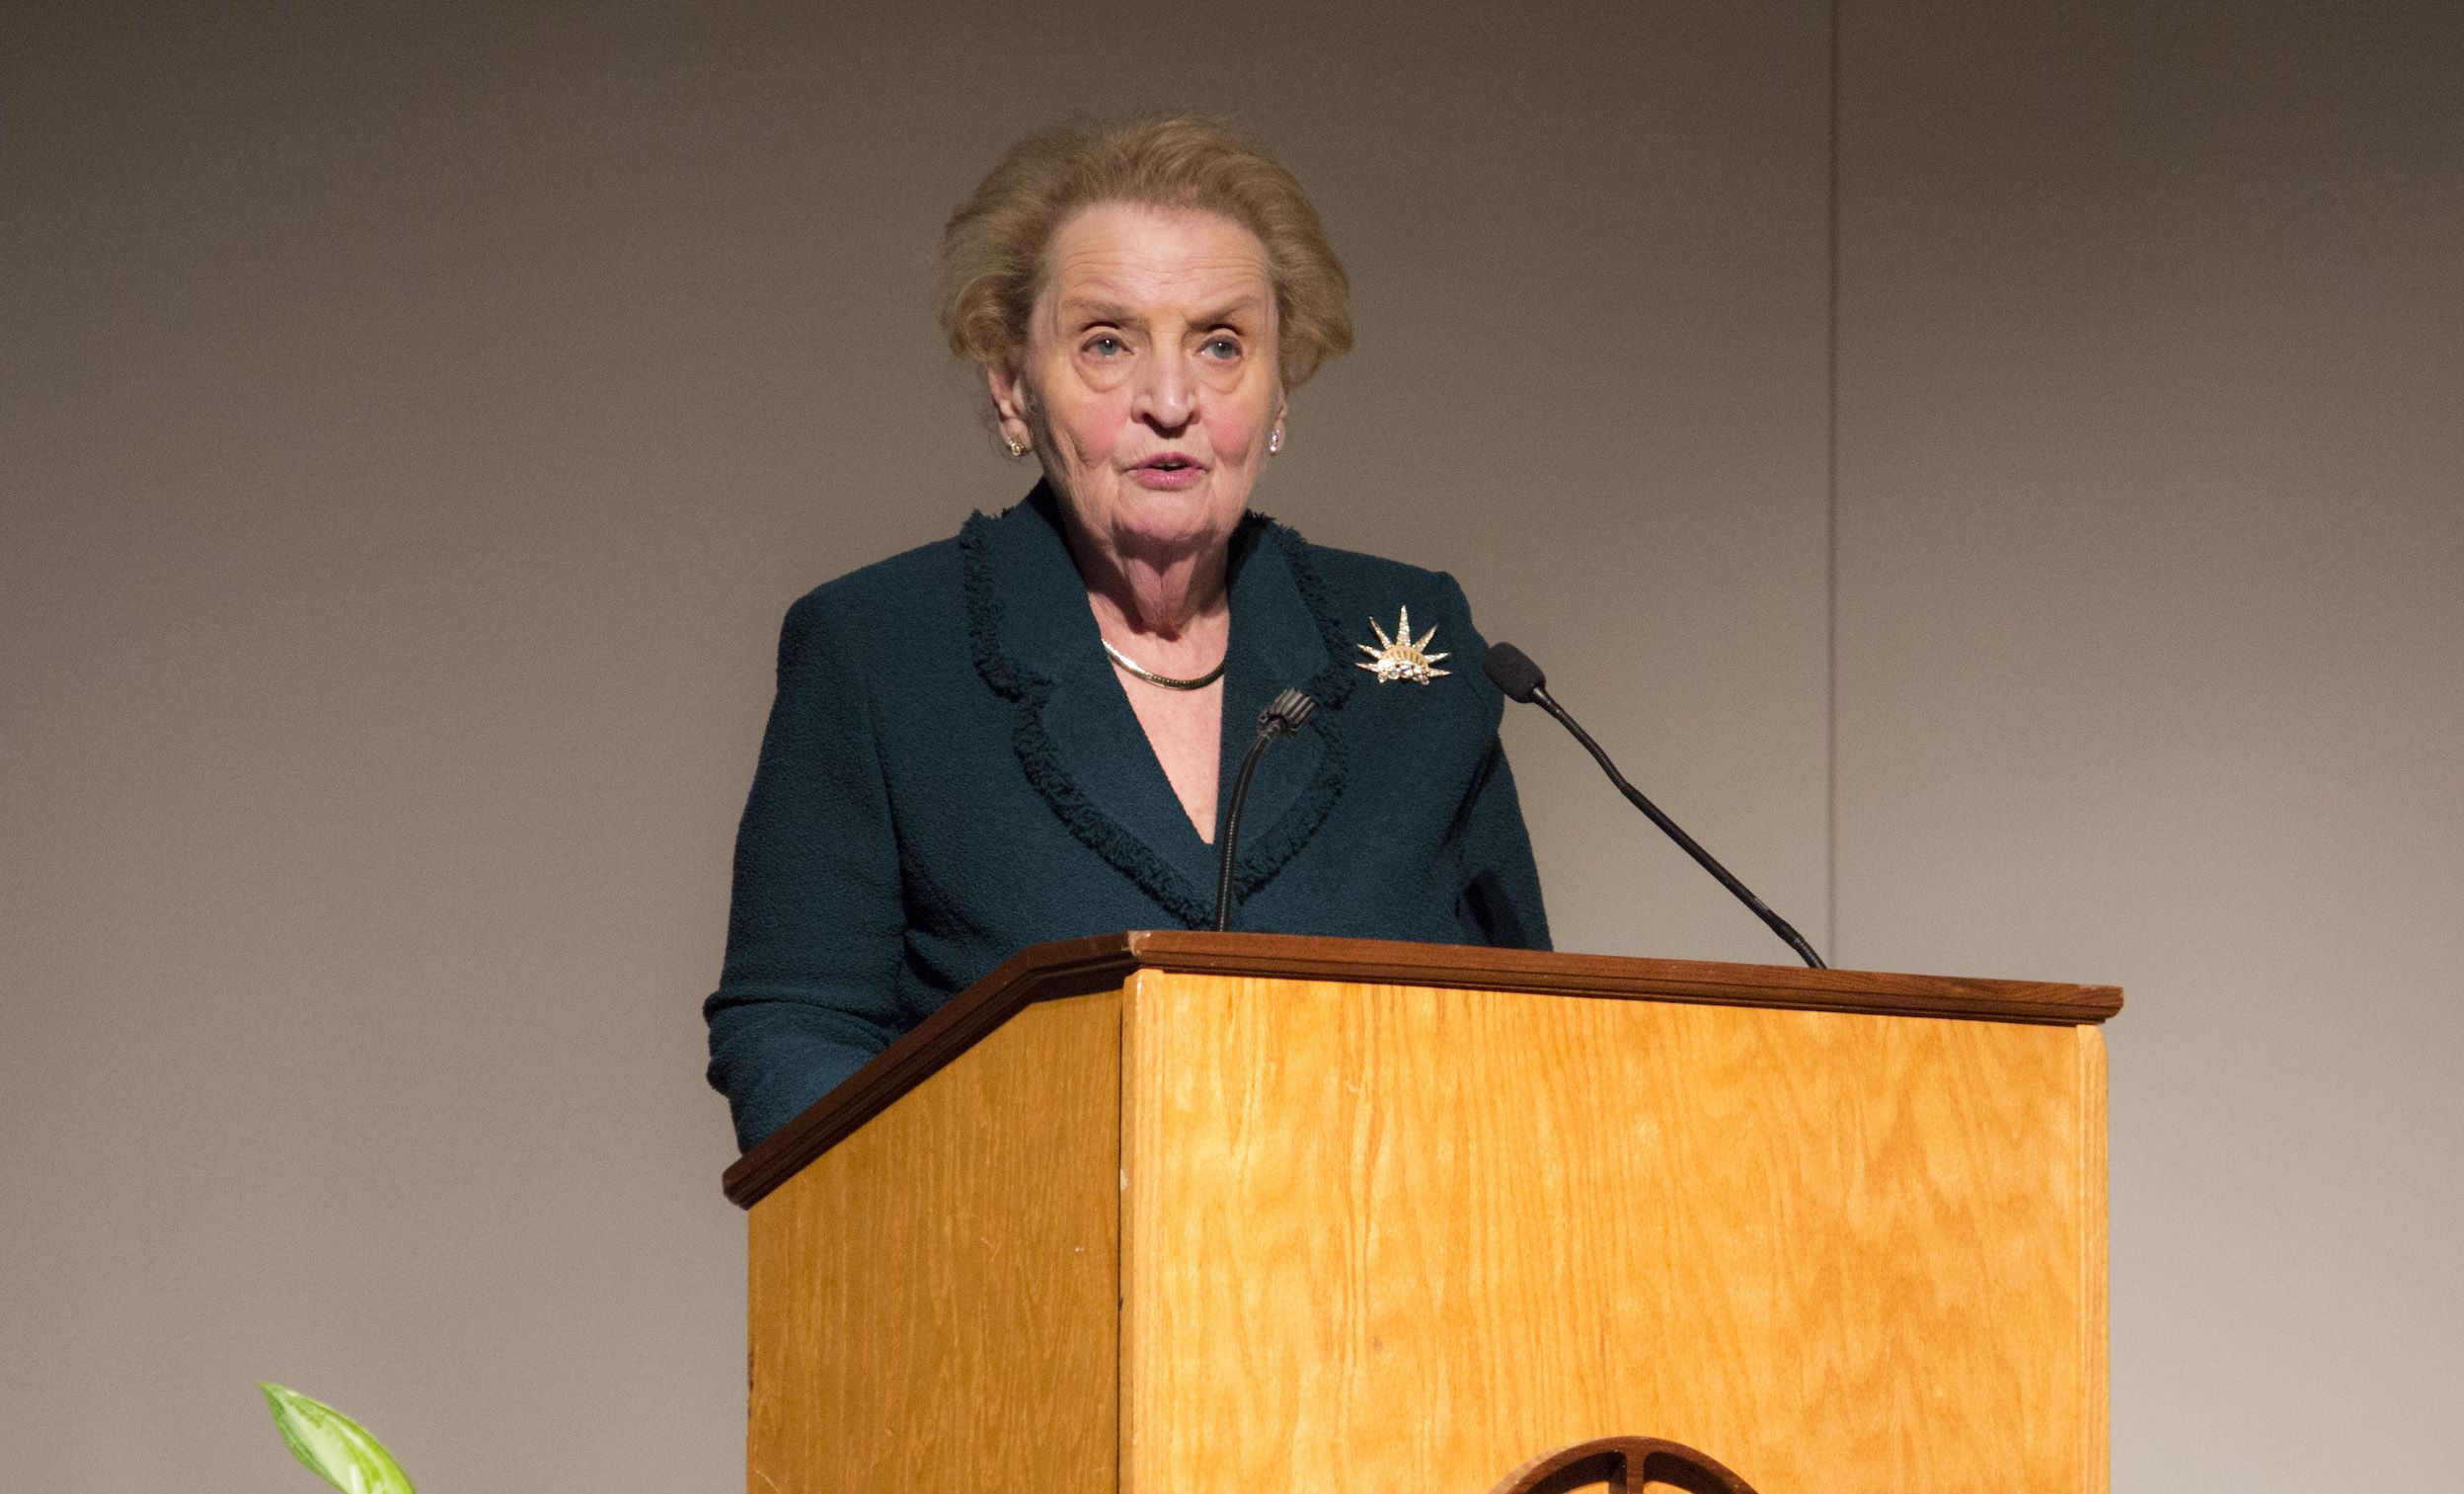 Madeleine Albright speaks to students at Nerinx Hall High School in St. Louis, about her first experience on a newspaper in Rolla, Missouri. Image by Lauren Shepherd, United States, 2017.